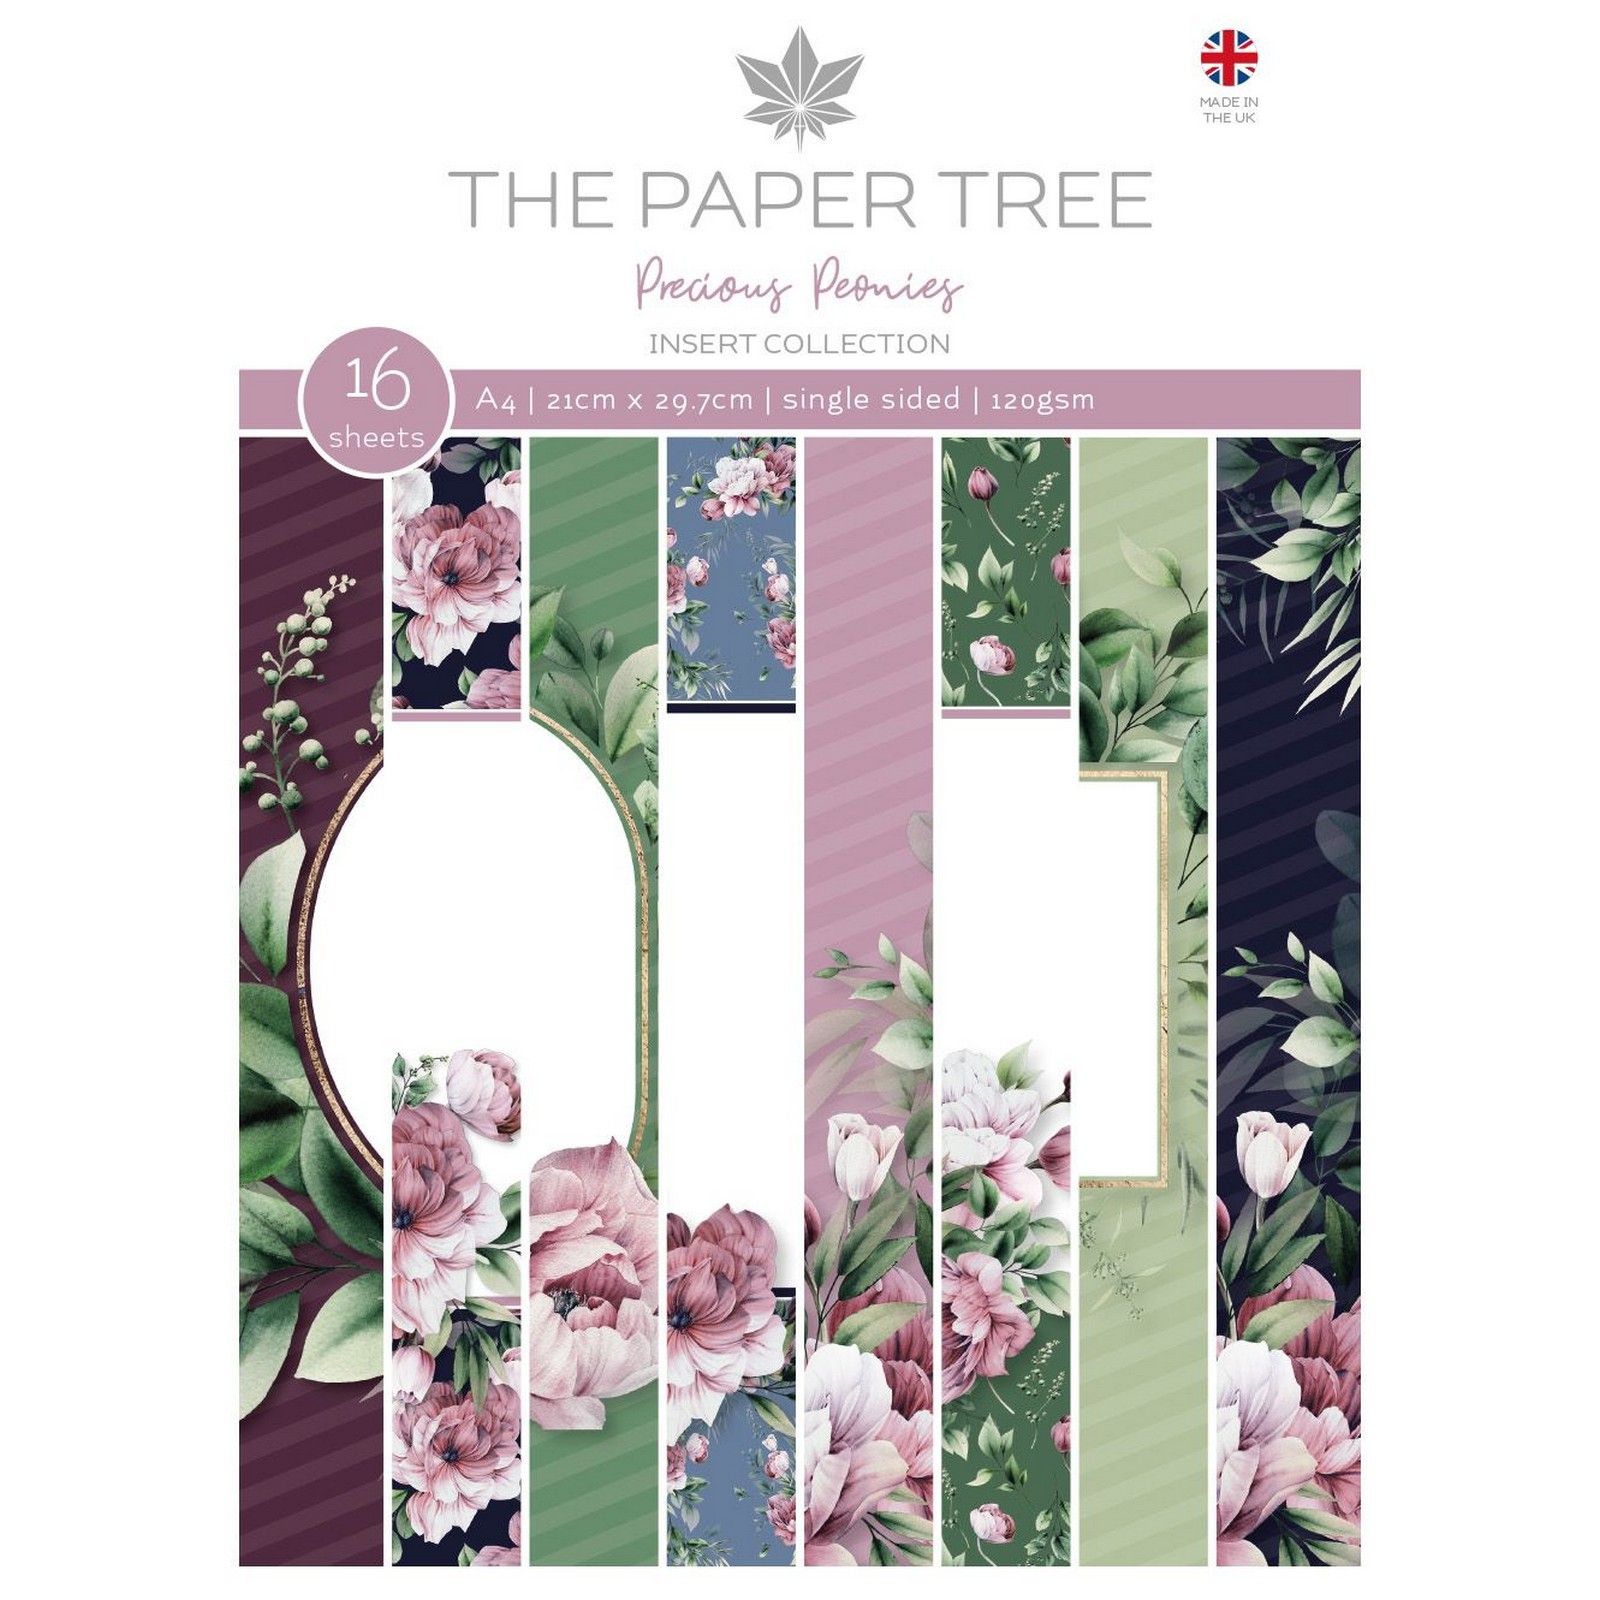 The Paper Tree • Precious Peonies Insert Collection